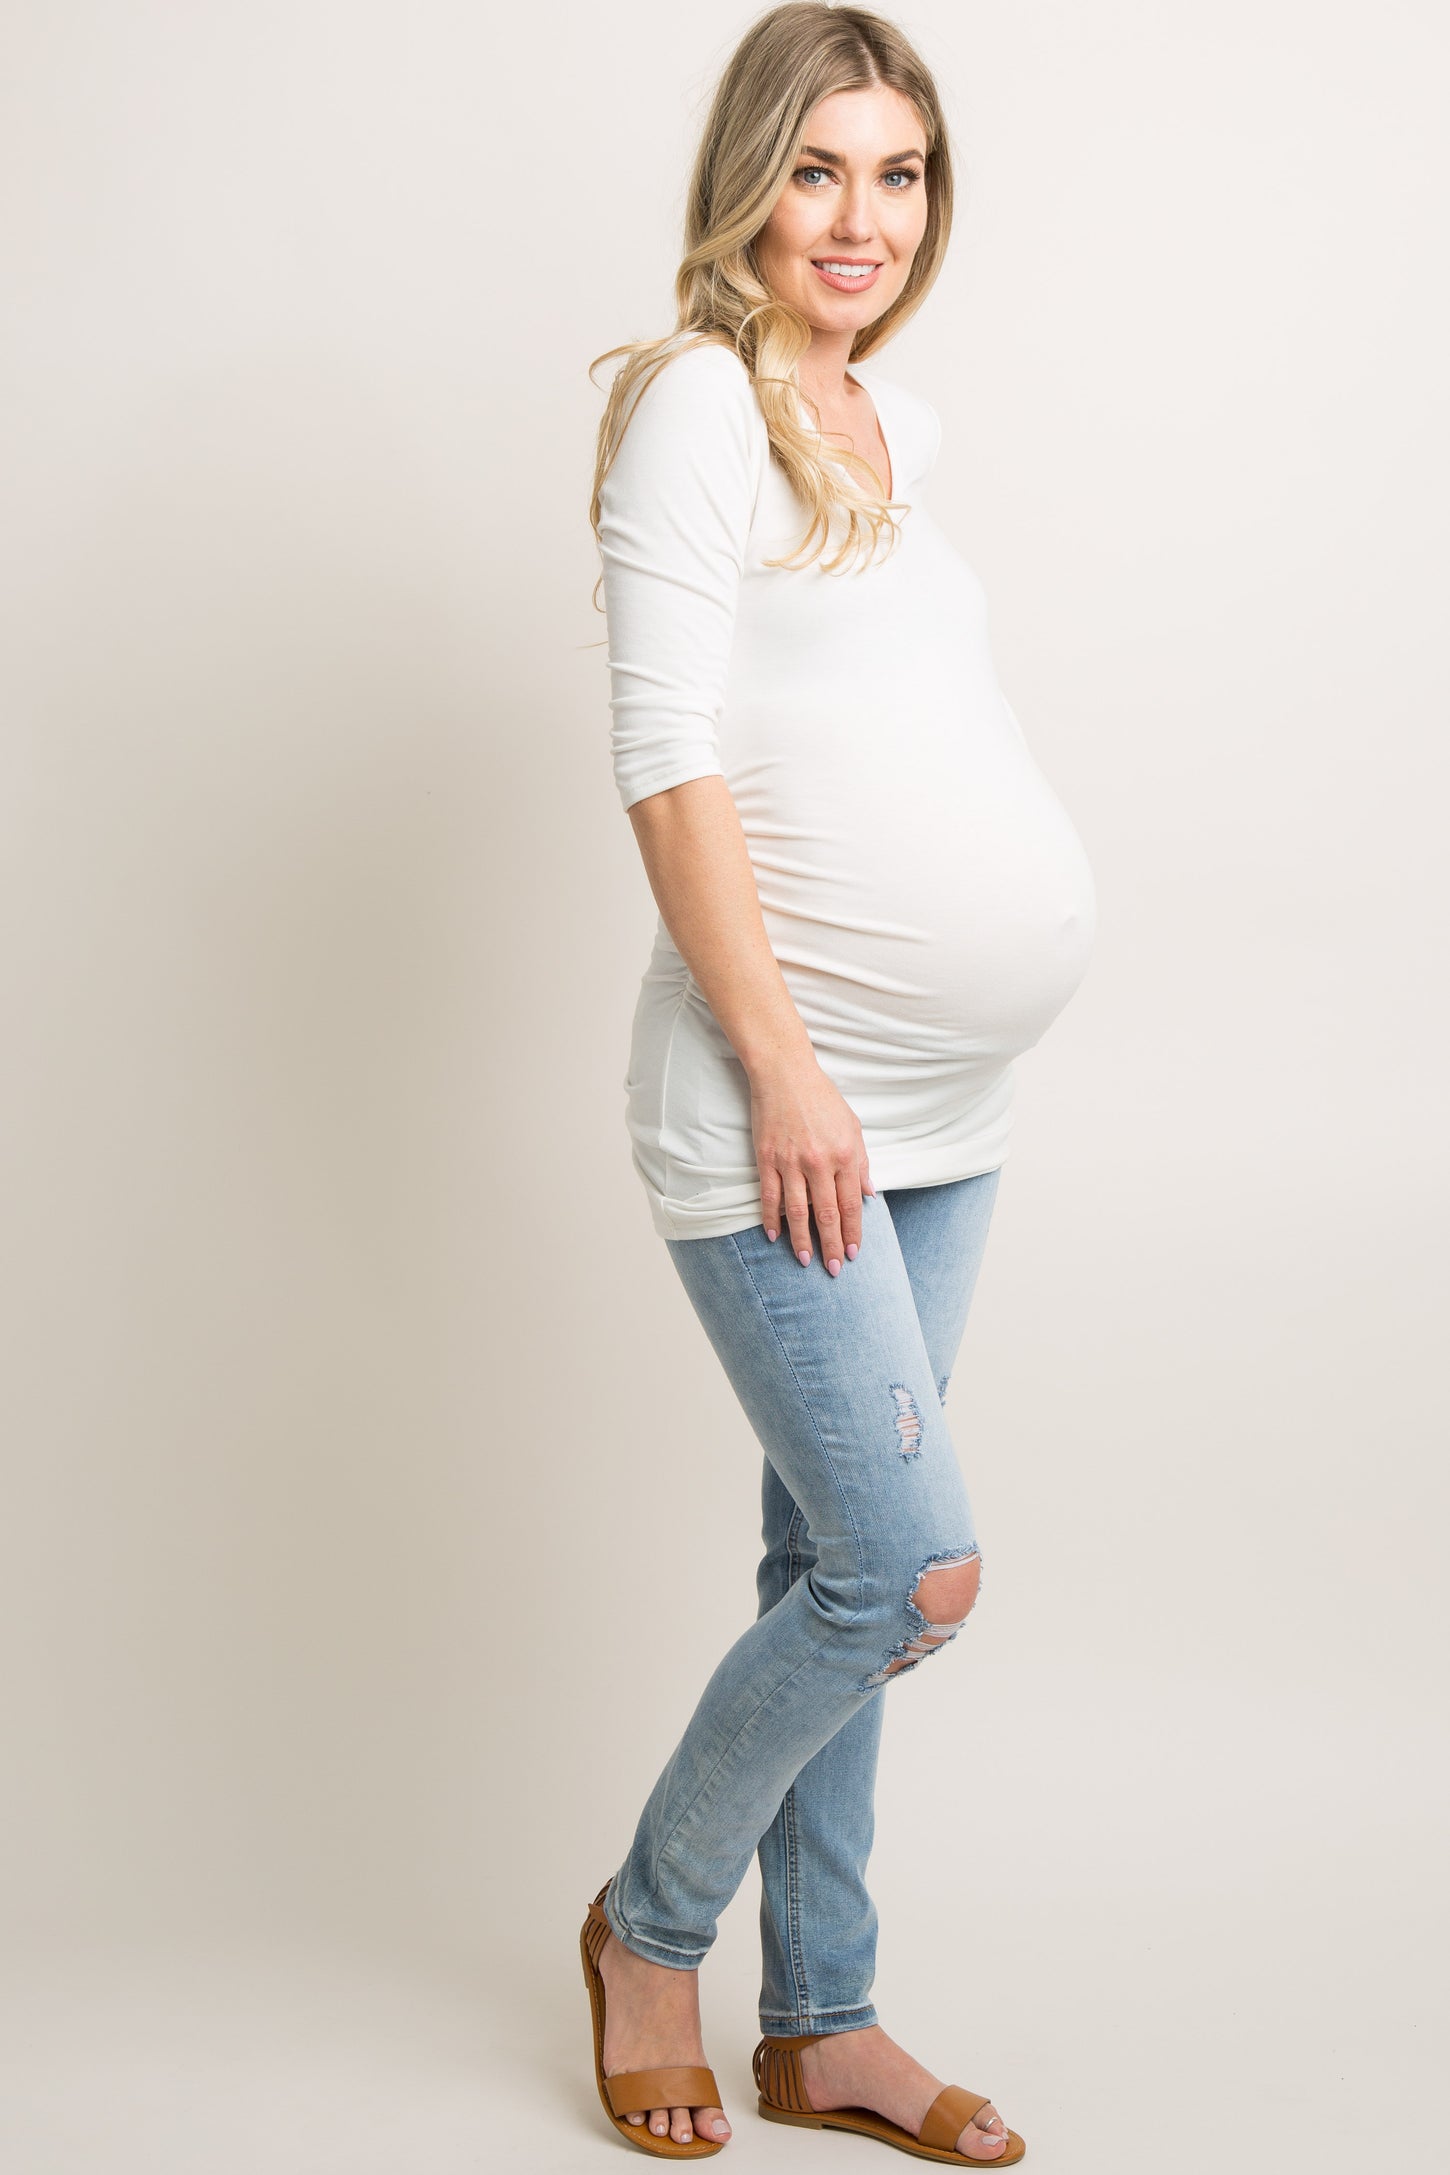 PinkBlush White V-Neck 3/4 Sleeve Fitted Maternity Top